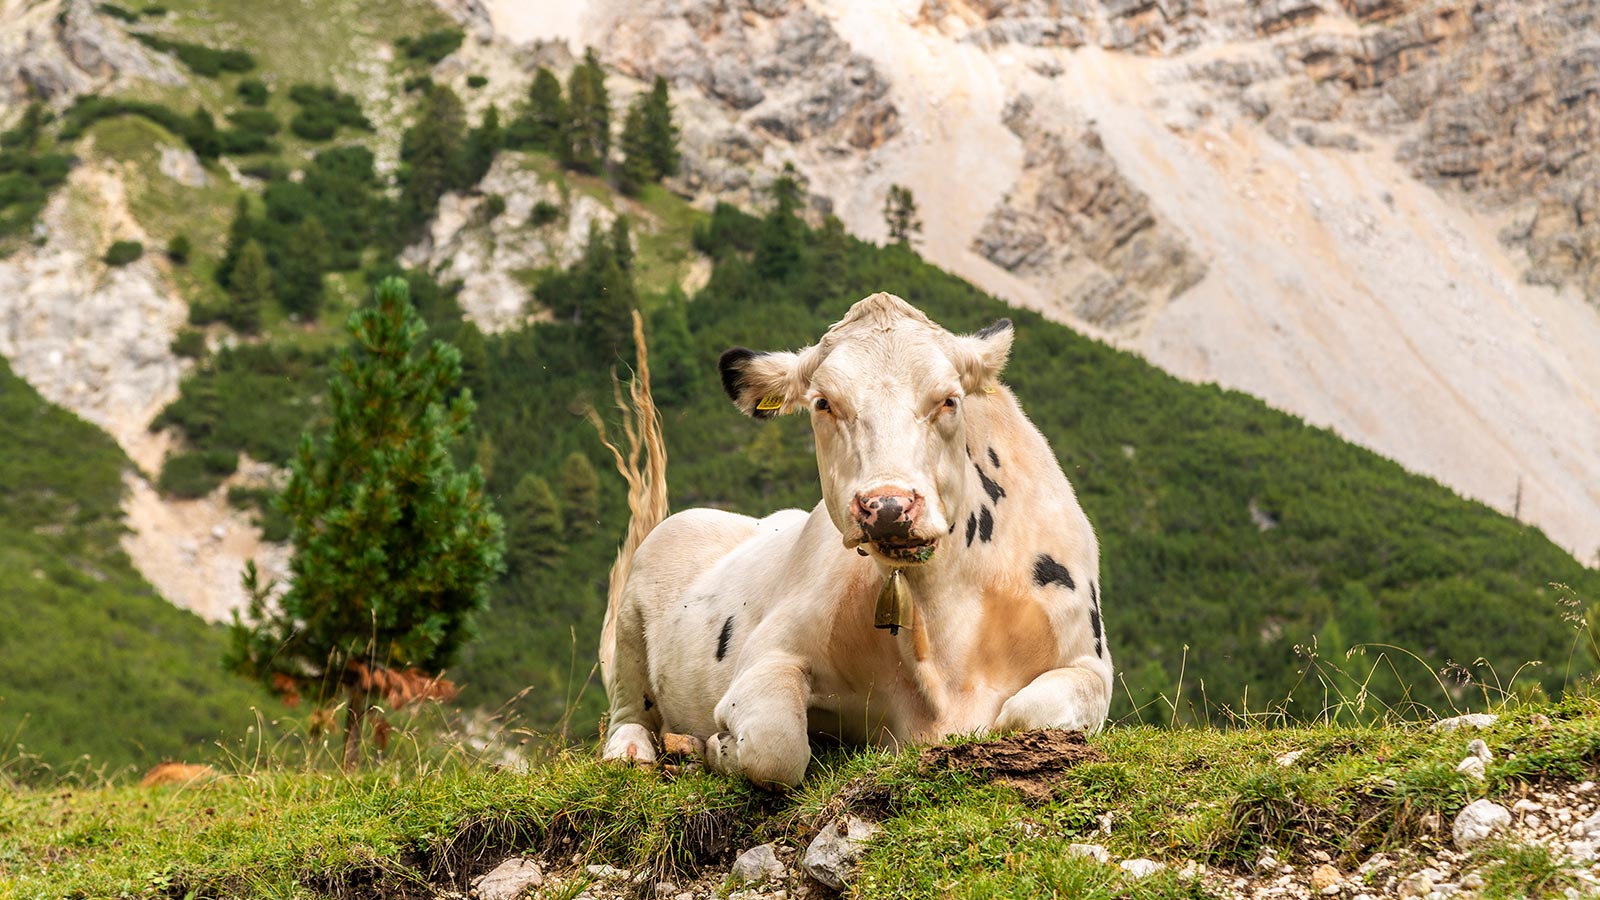 A cow sits on the grass in the Fanes-Senes-Braies Natural Park